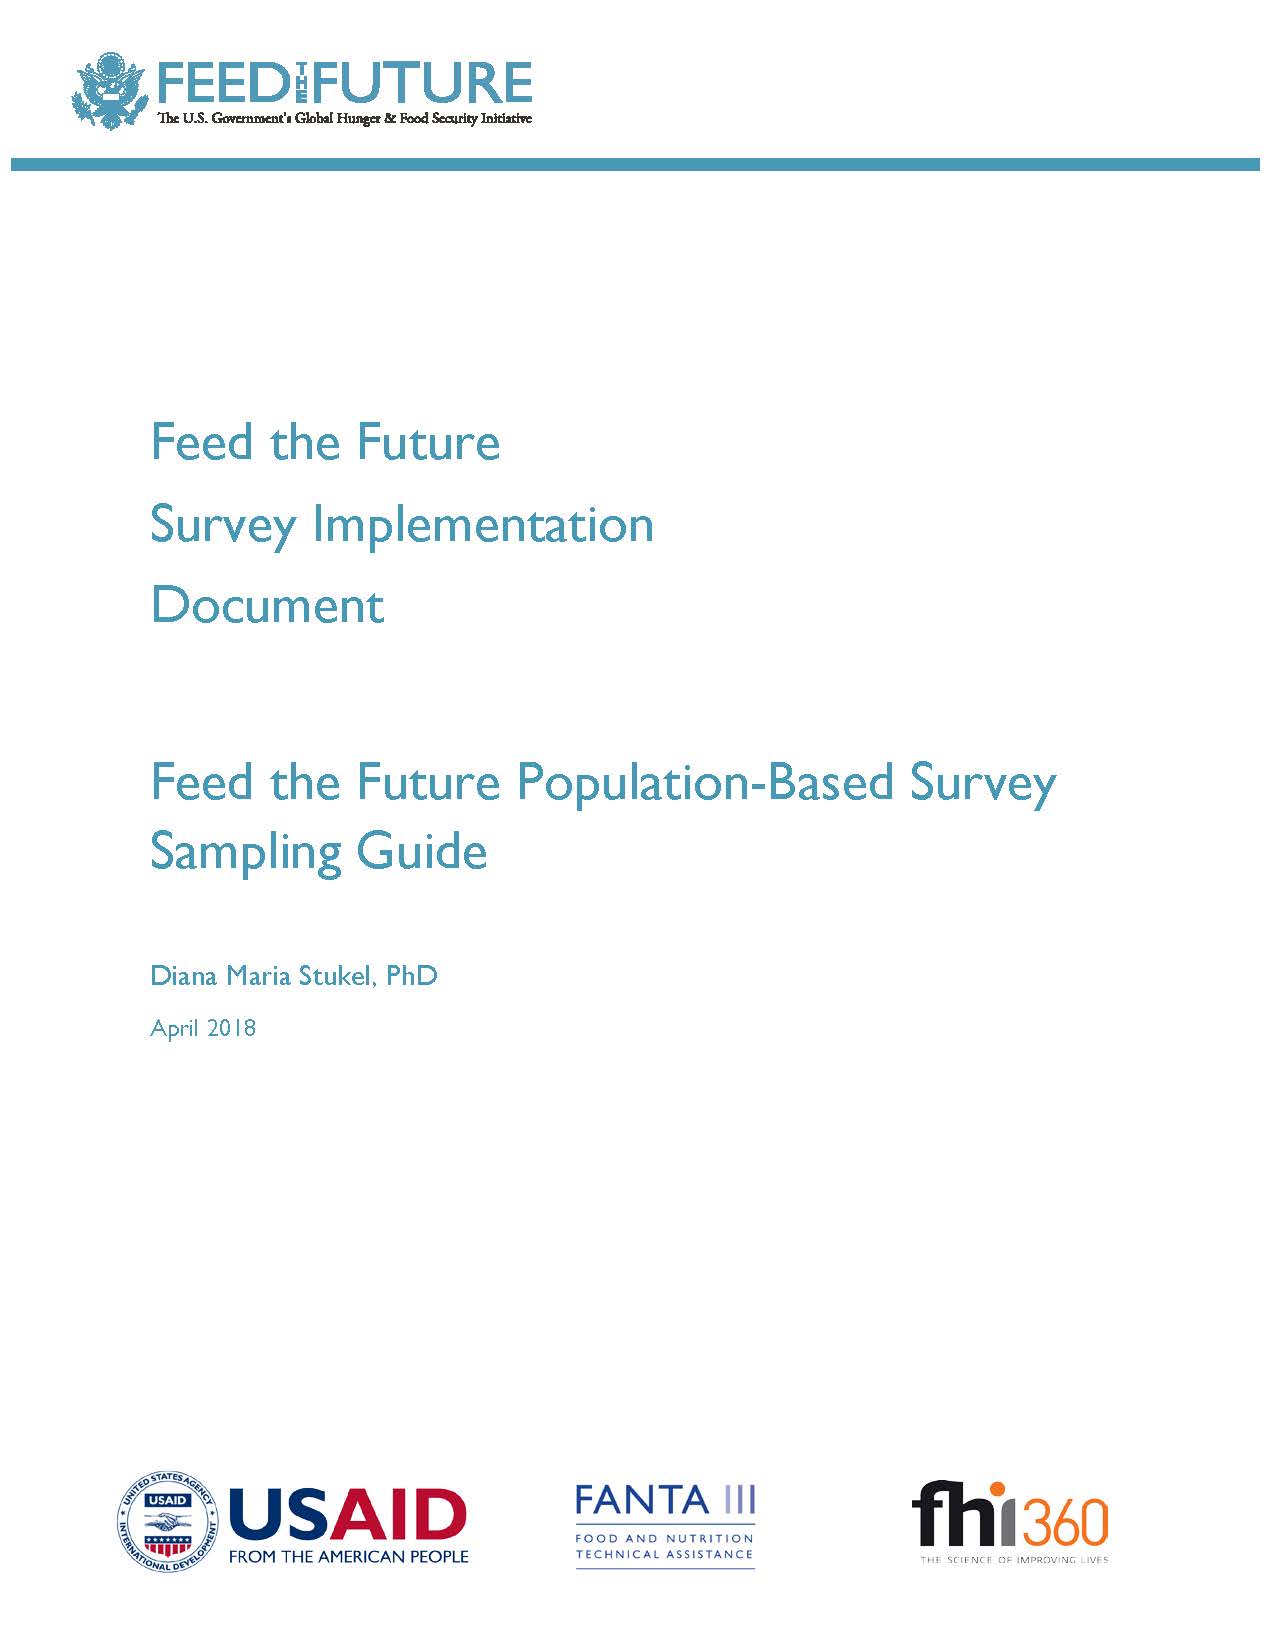 Feed the Future Population-Based Survey Sampling Guide